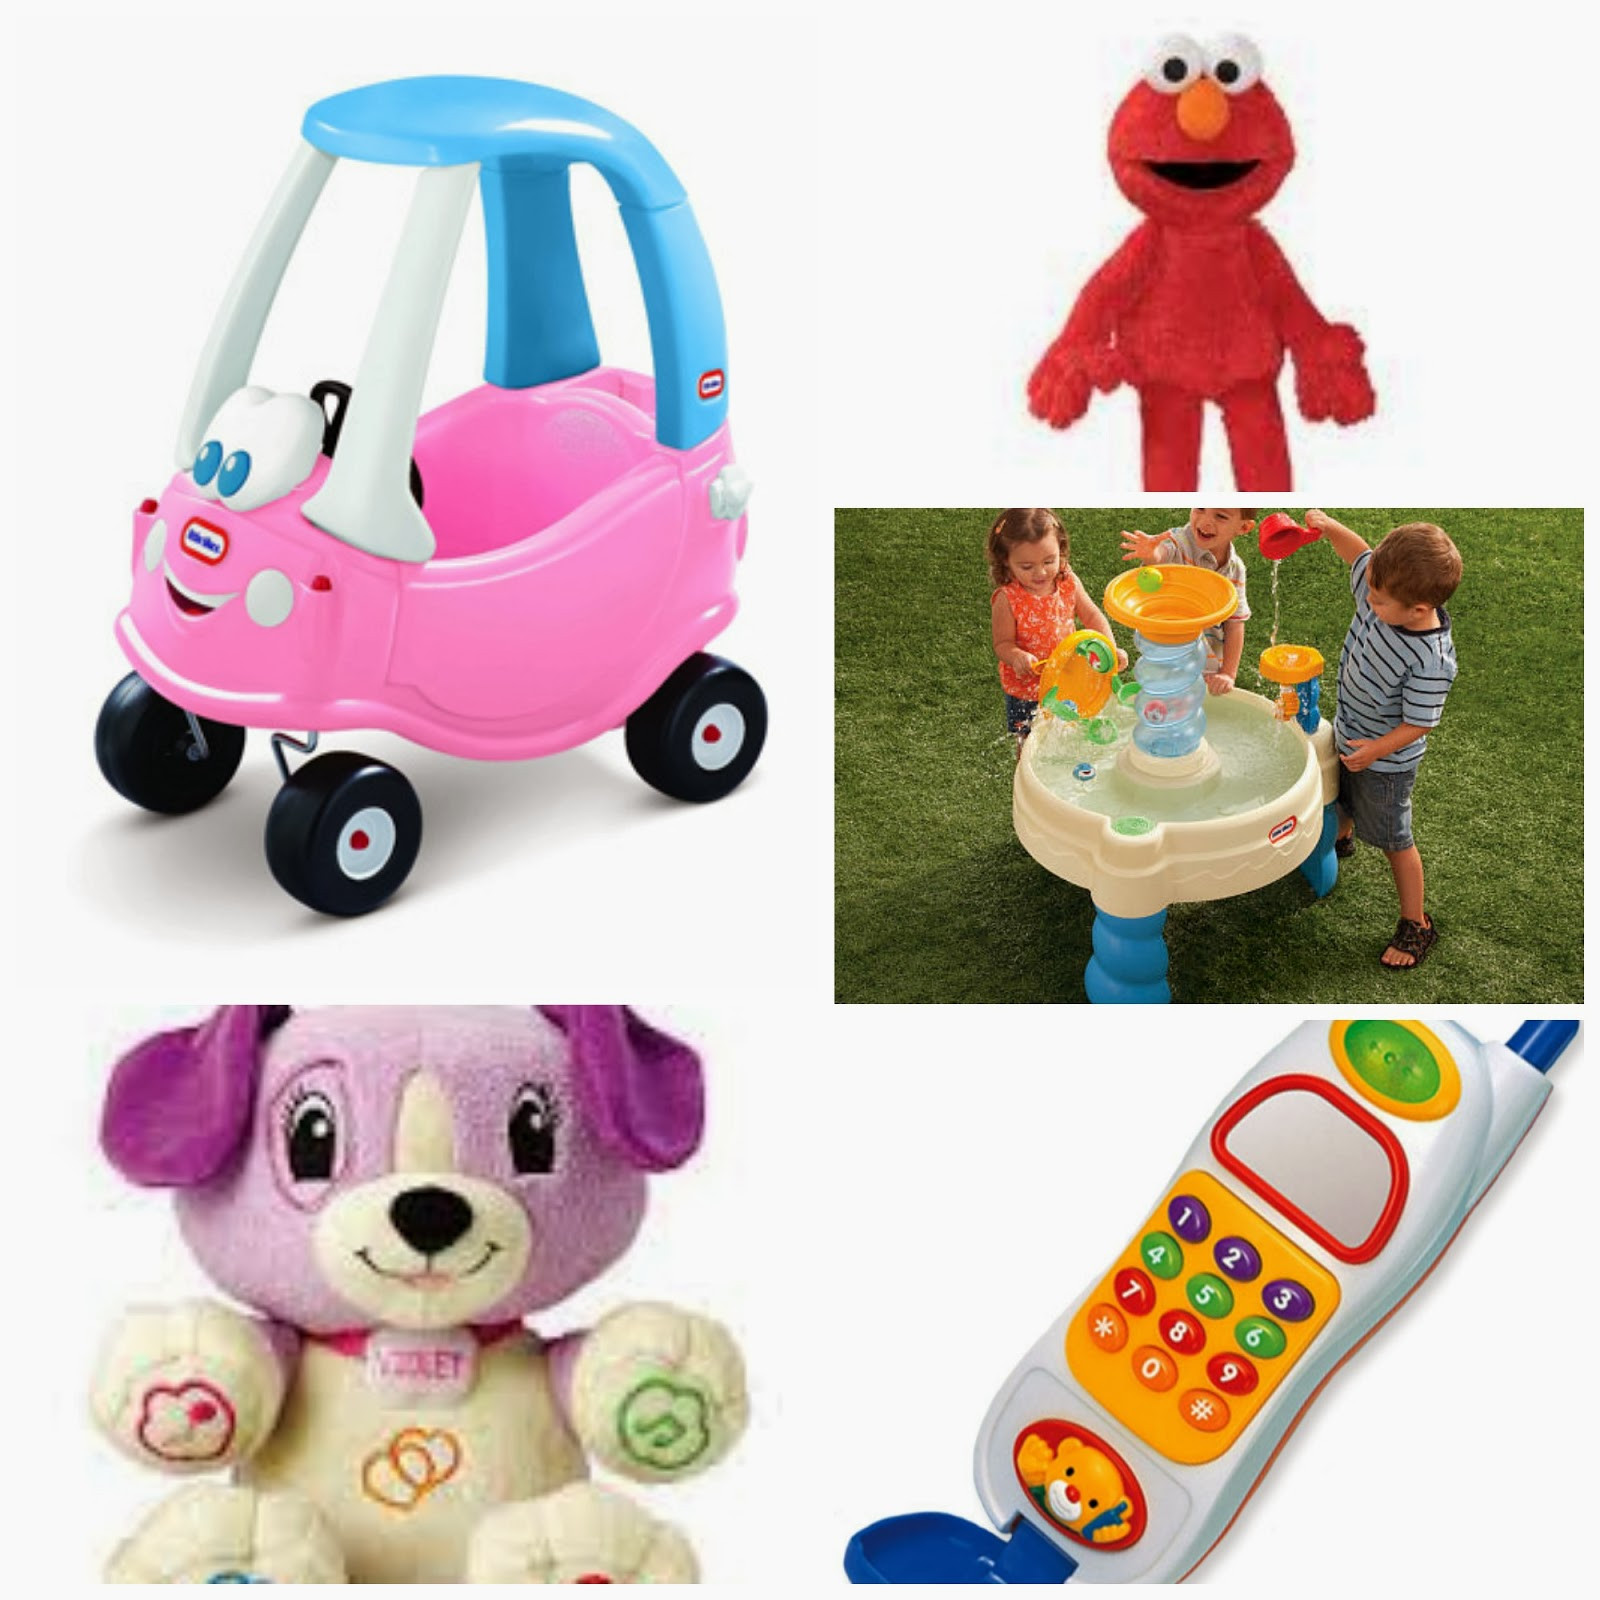 One Year Gift Ideas For Girlfriend
 Gifts Ideas for a 1 Year Old Girl